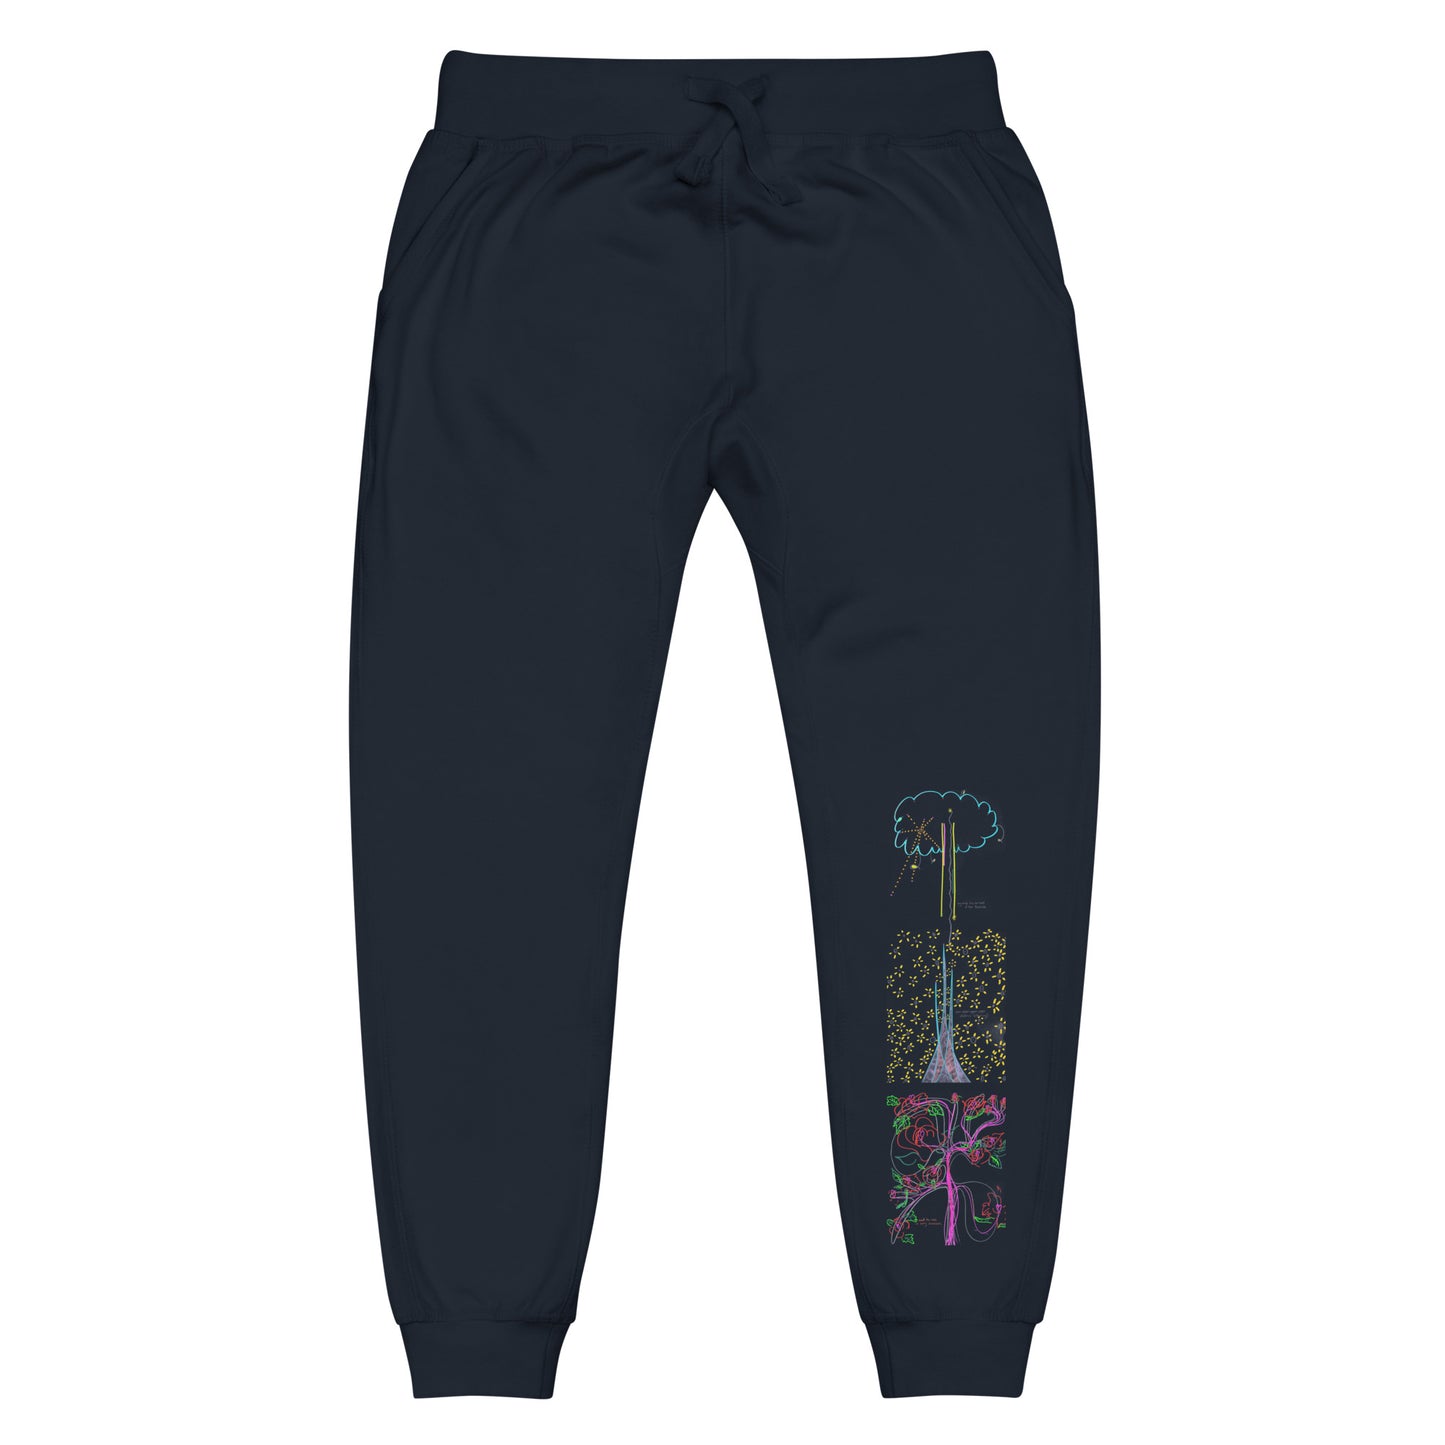 Seven Shields, 100% cotton joggers (in navy & maroon)